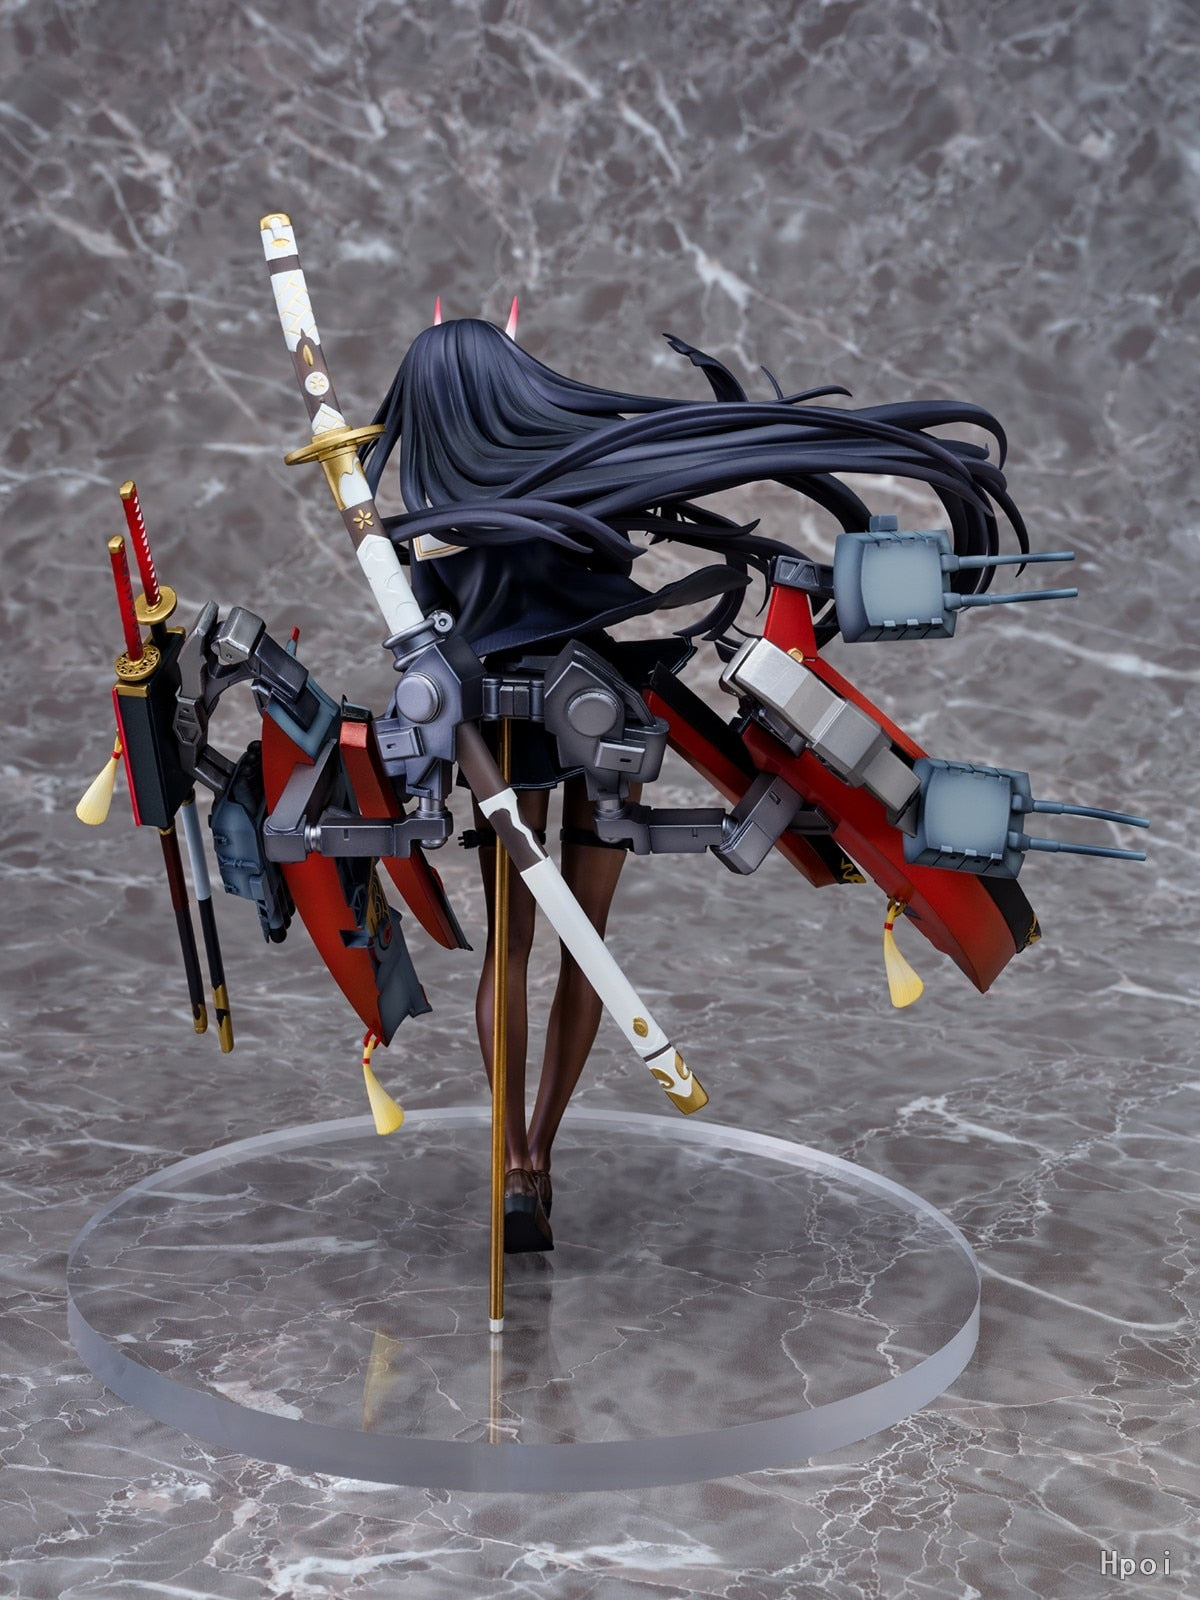 This figurine captures Noshiro commanding presence, tactical mind, & unwavering resolve. If you are looking for more Azur Lane Merch, We have it all! | Check out all our Anime Merch now!